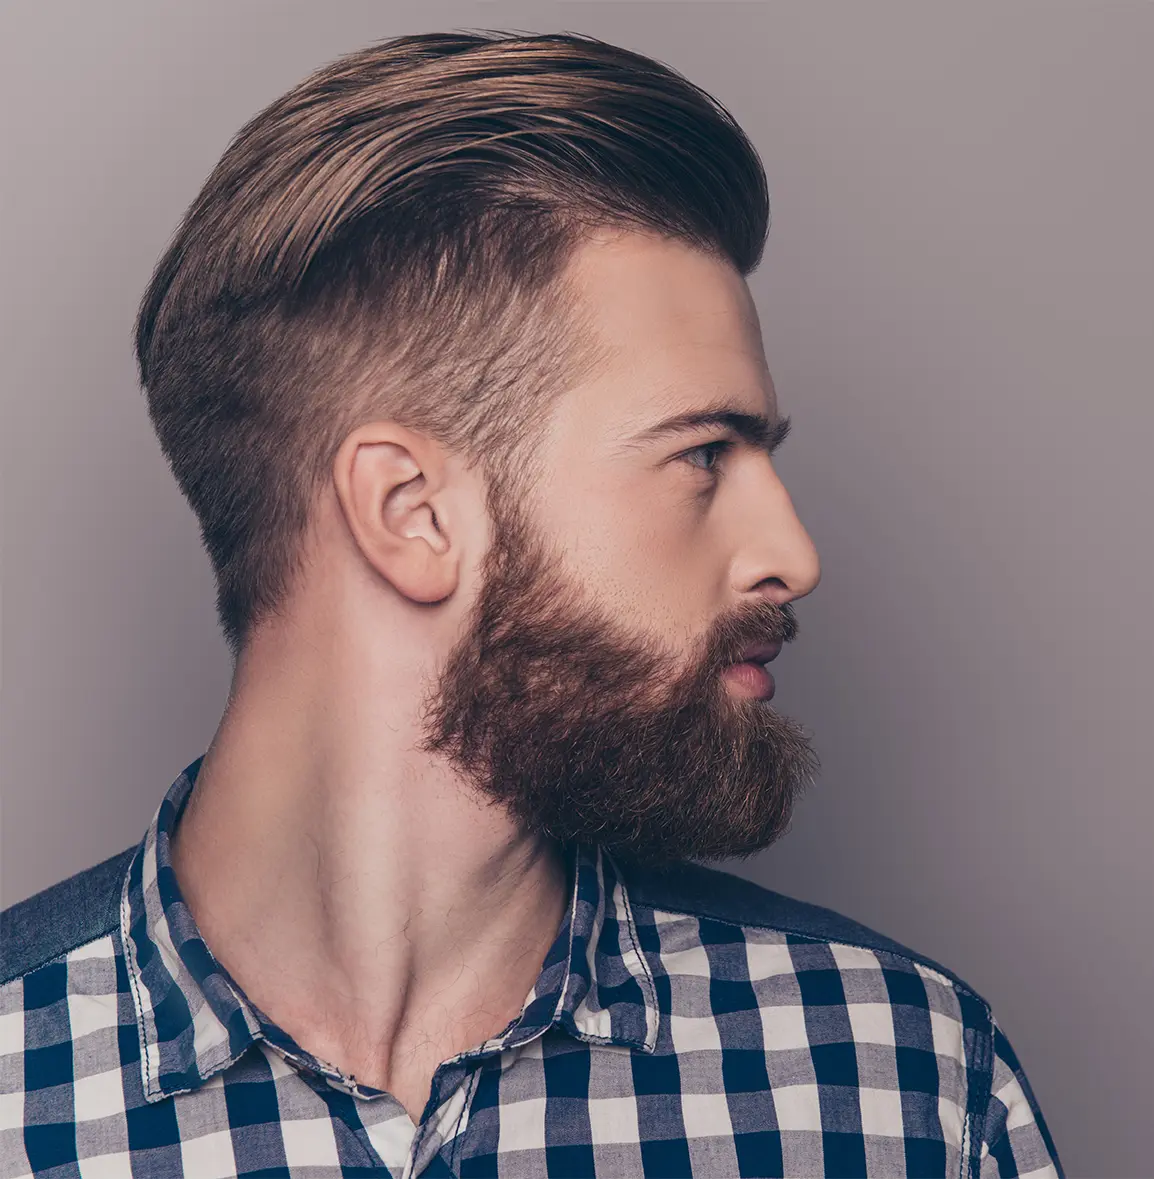 A man with a well-groomed beard after a beard camouflage procedure